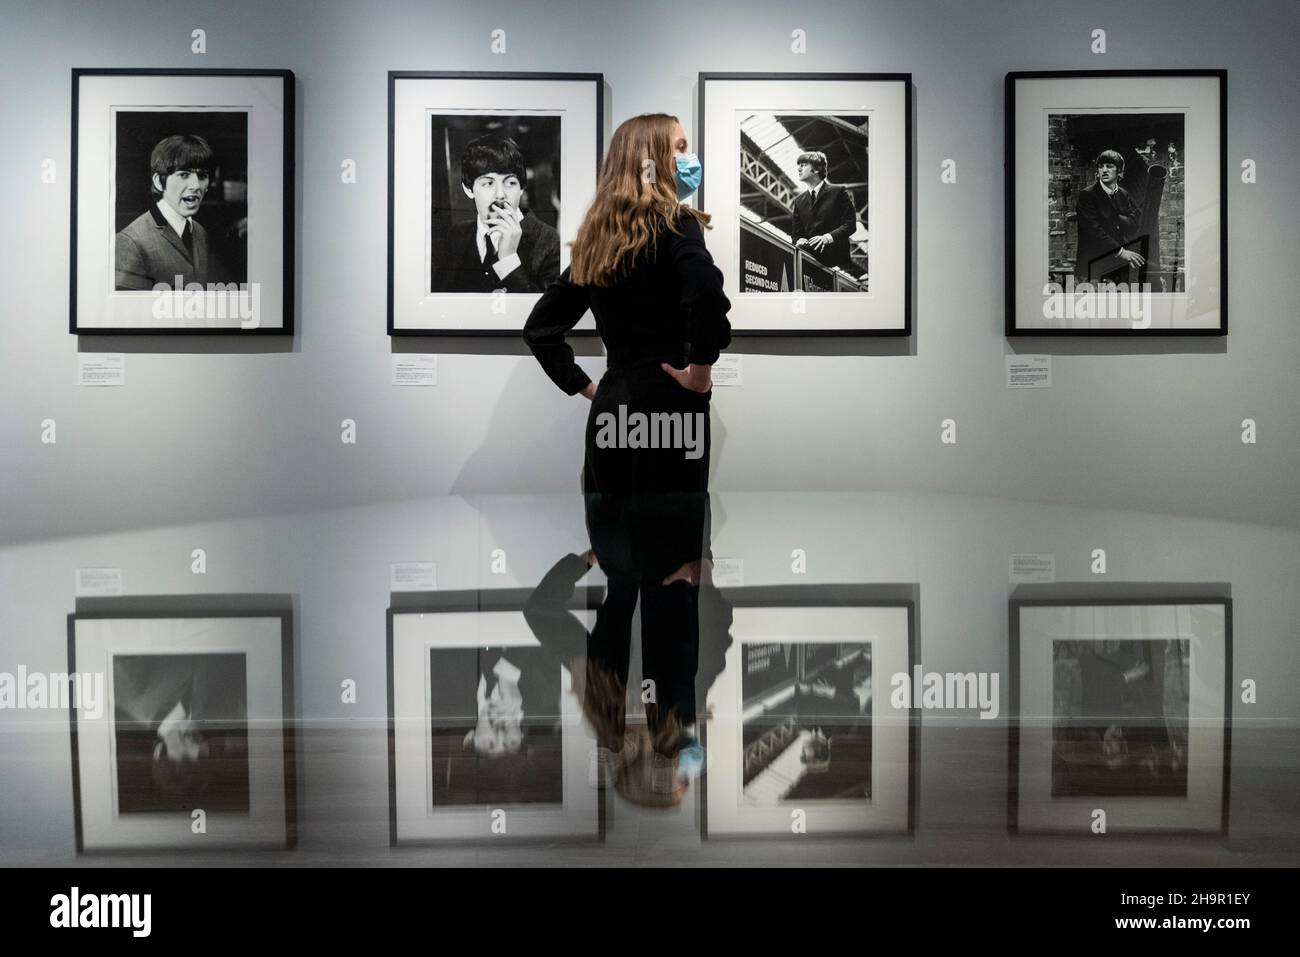 London, UK.  8 December 2021.  A staff member next to photos of George Harrison, Paul McCartney, John Lennon and Ringo Starr at the preview of an exhibition of lost photographs of The Beatles by Lord Thynne, son of the 6th Marquess of Bath.  The exhibition, featuring candid images of the band in spring 1964 on the set of their first film A Hard Day’s Night, is at the Shapero Modern Gallery in Mayfair until 16 January 2022. Credit: Stephen Chung / Alamy Live News Stock Photo